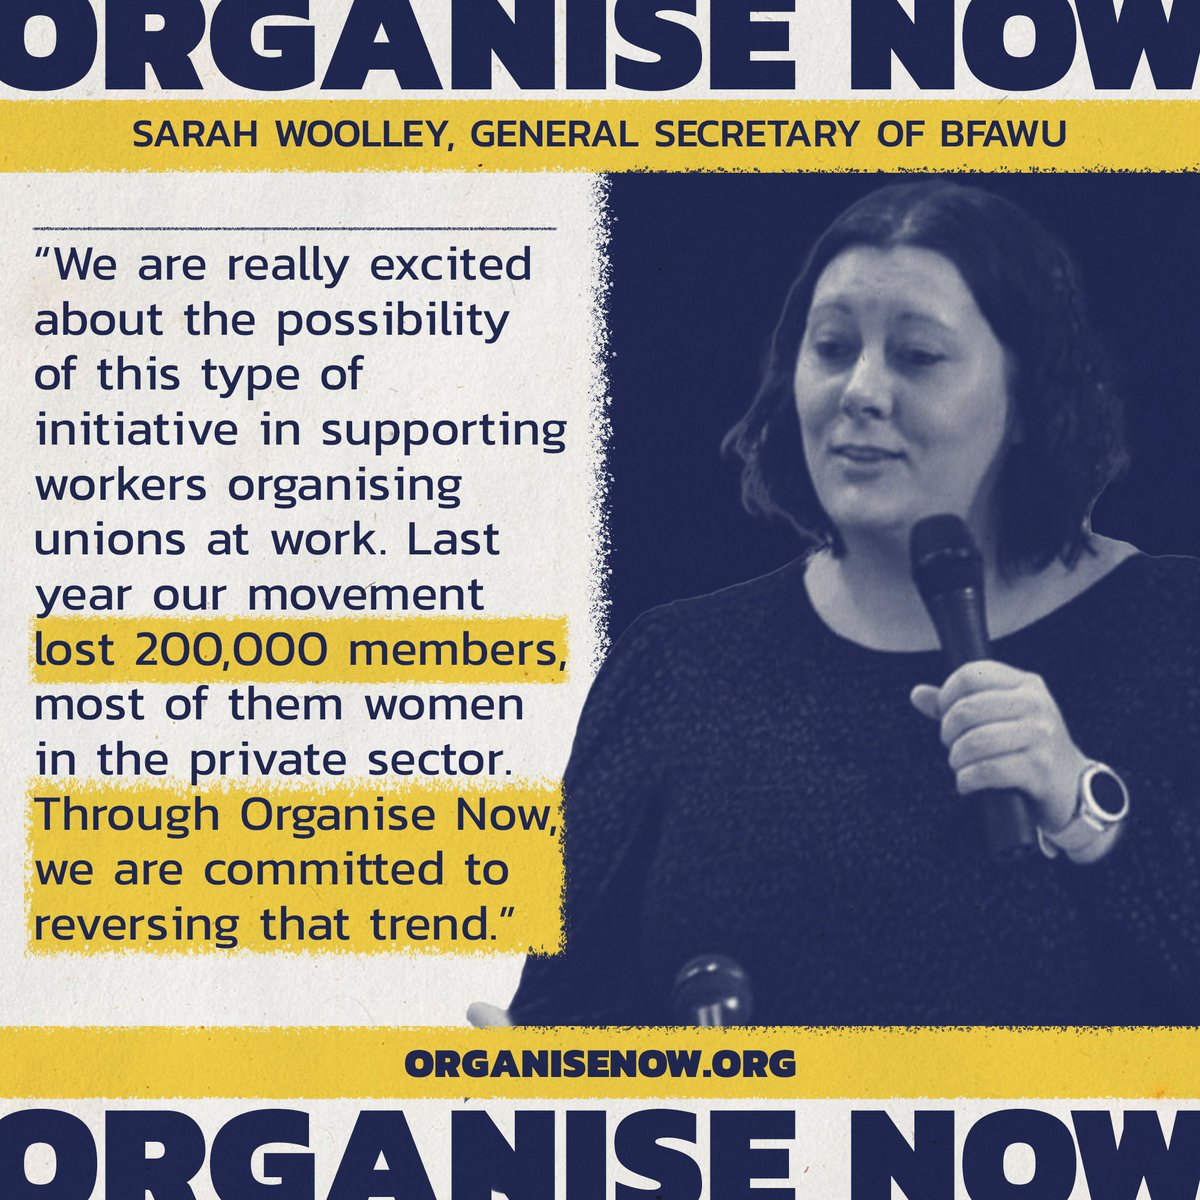 .@SarahWoolley01 is right. The trade union movement cannot continue to haemorrhage members and give ground to exploitative bosses and corporations. That's why we created our new chatbot. We need every tool available to fight back! Try the chatbot here organisenow.org.uk/organise-now-c…